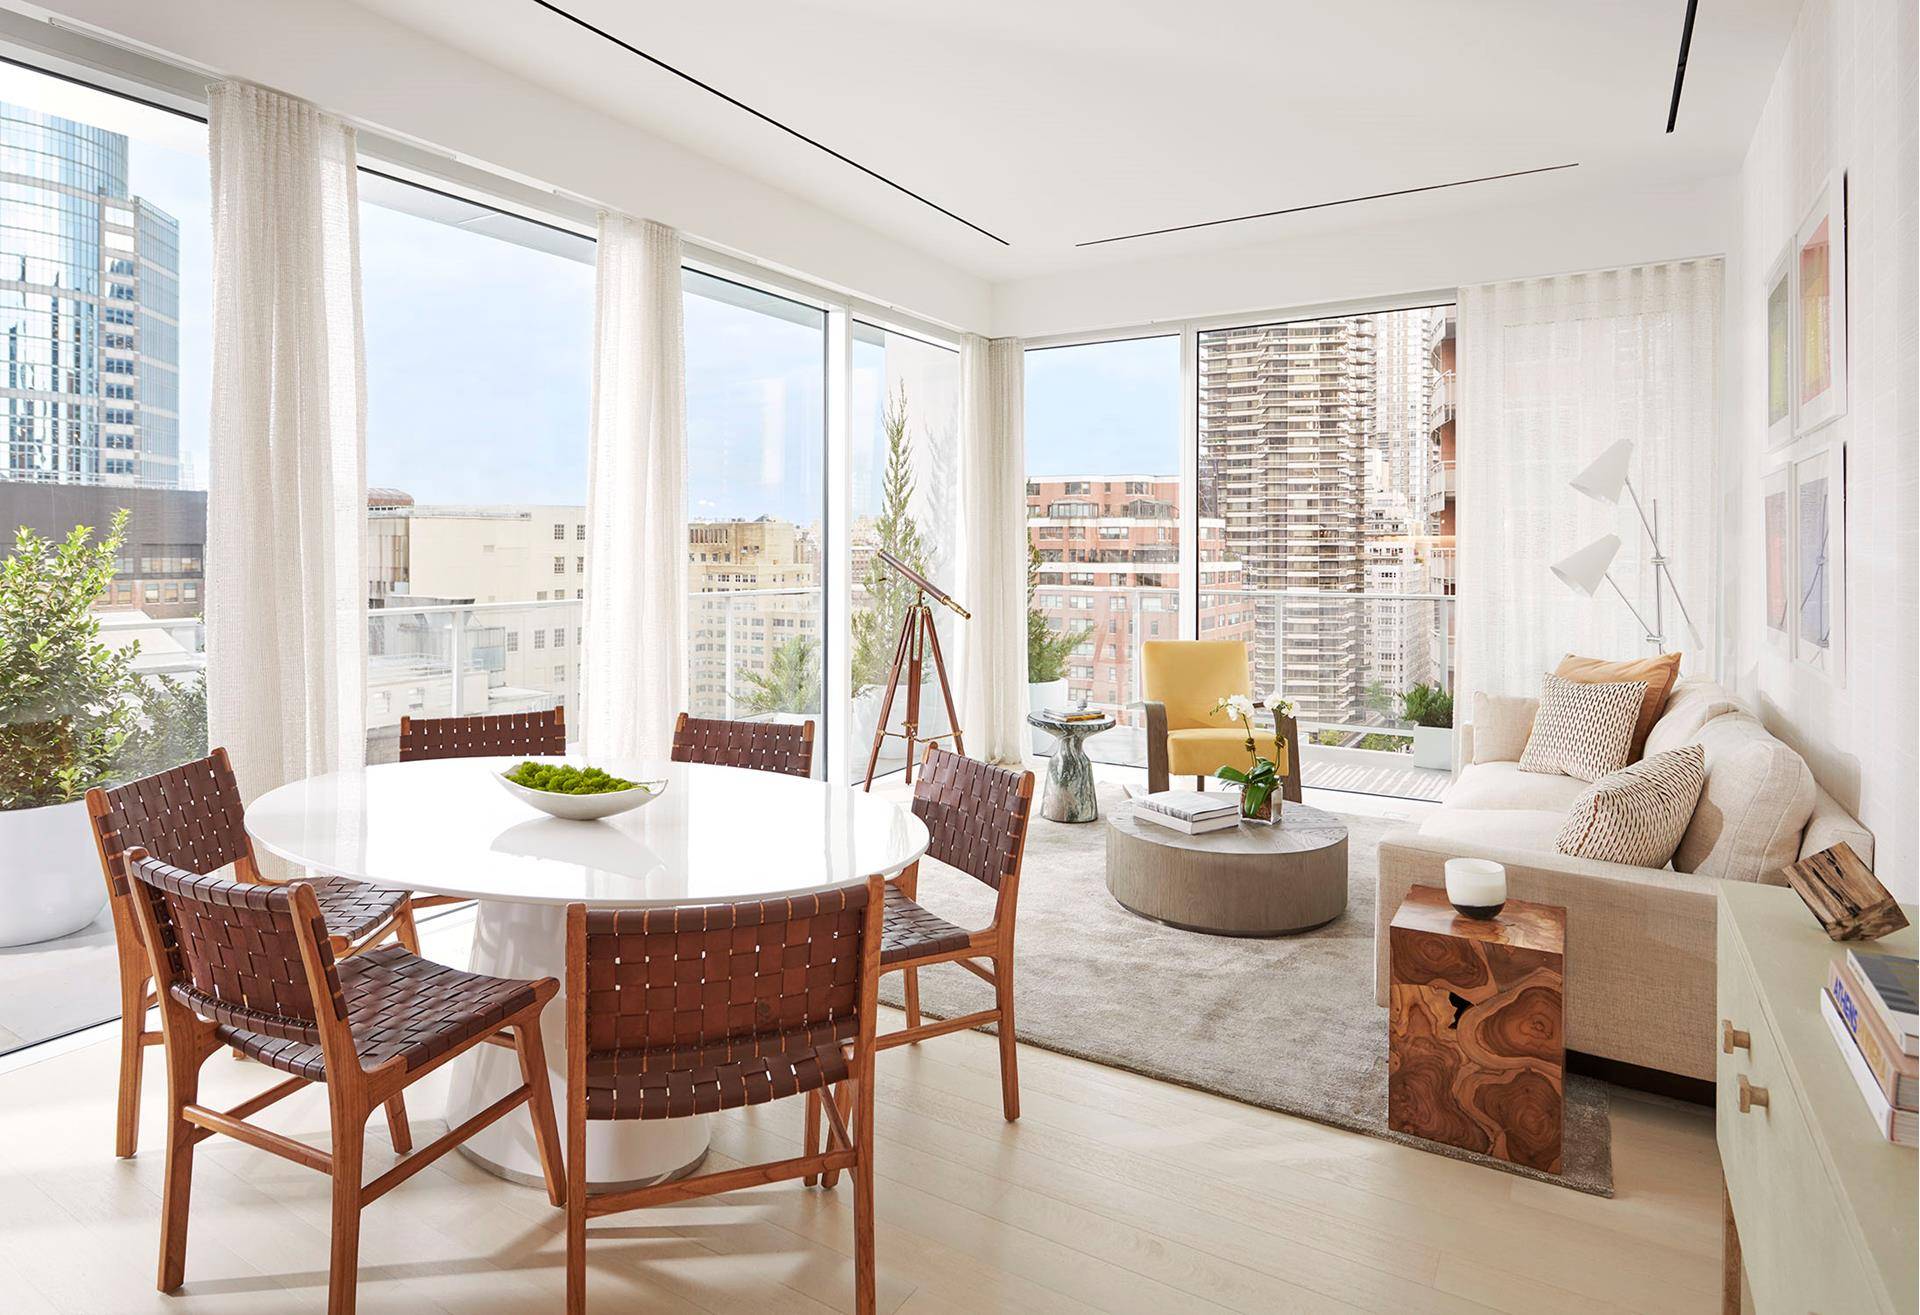 This spacious, corner 1, 416 square foot two bedroom, two and a half bath residence features a deep wraparound terrace overlooking Central Park, and western views of the Midtown skyline.